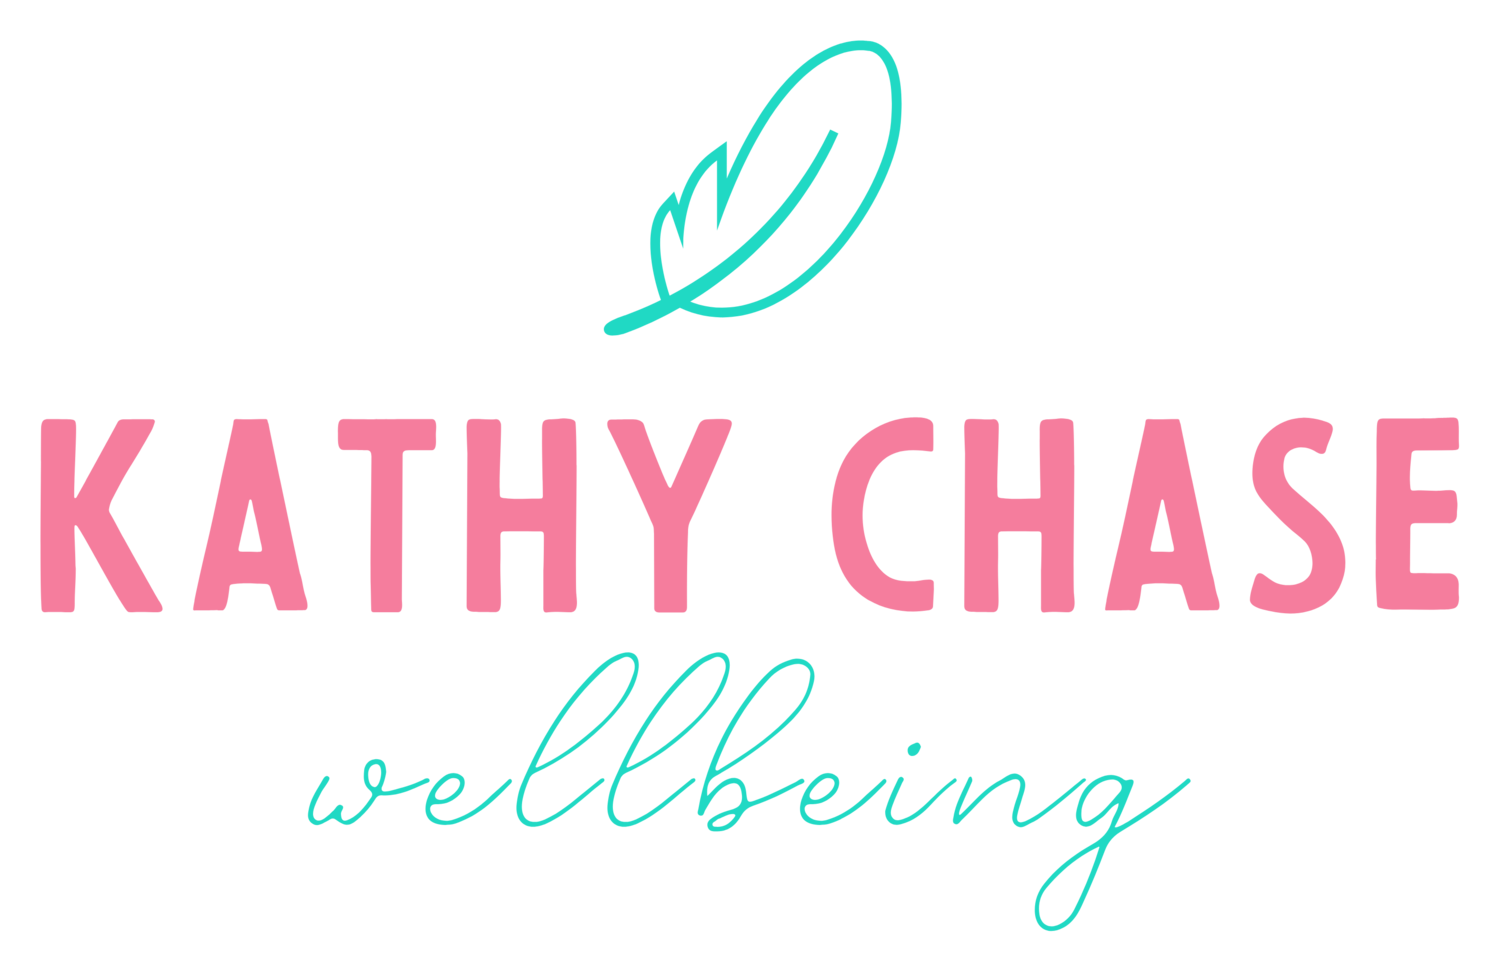 Kathy Chase Wellbeing